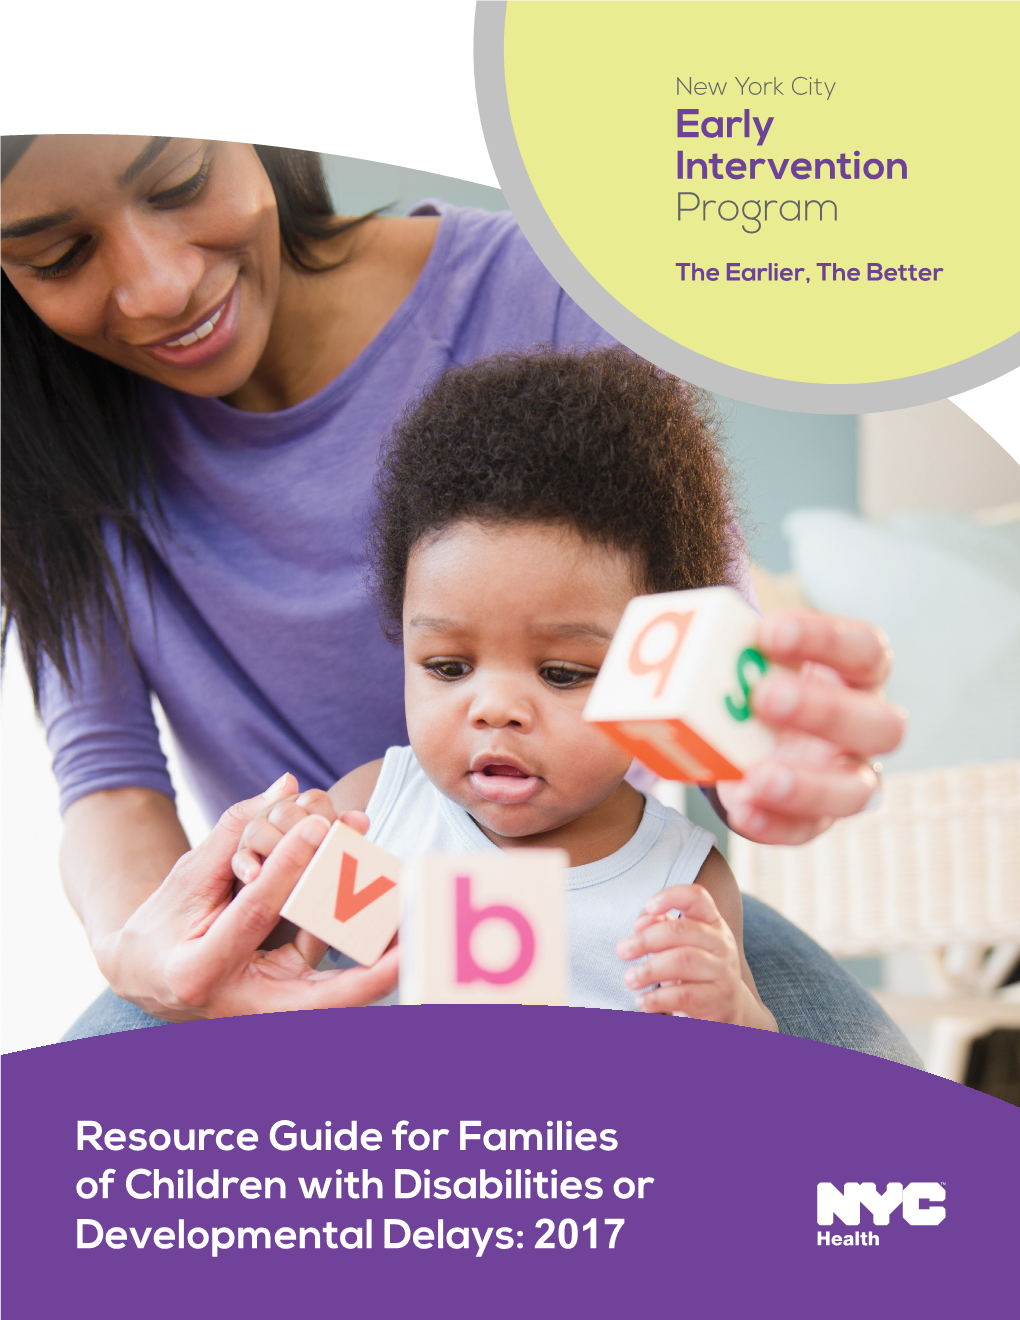 Resource Guide for Families of Children with Disabilities Or Developmental Delays: 2017 June 2017